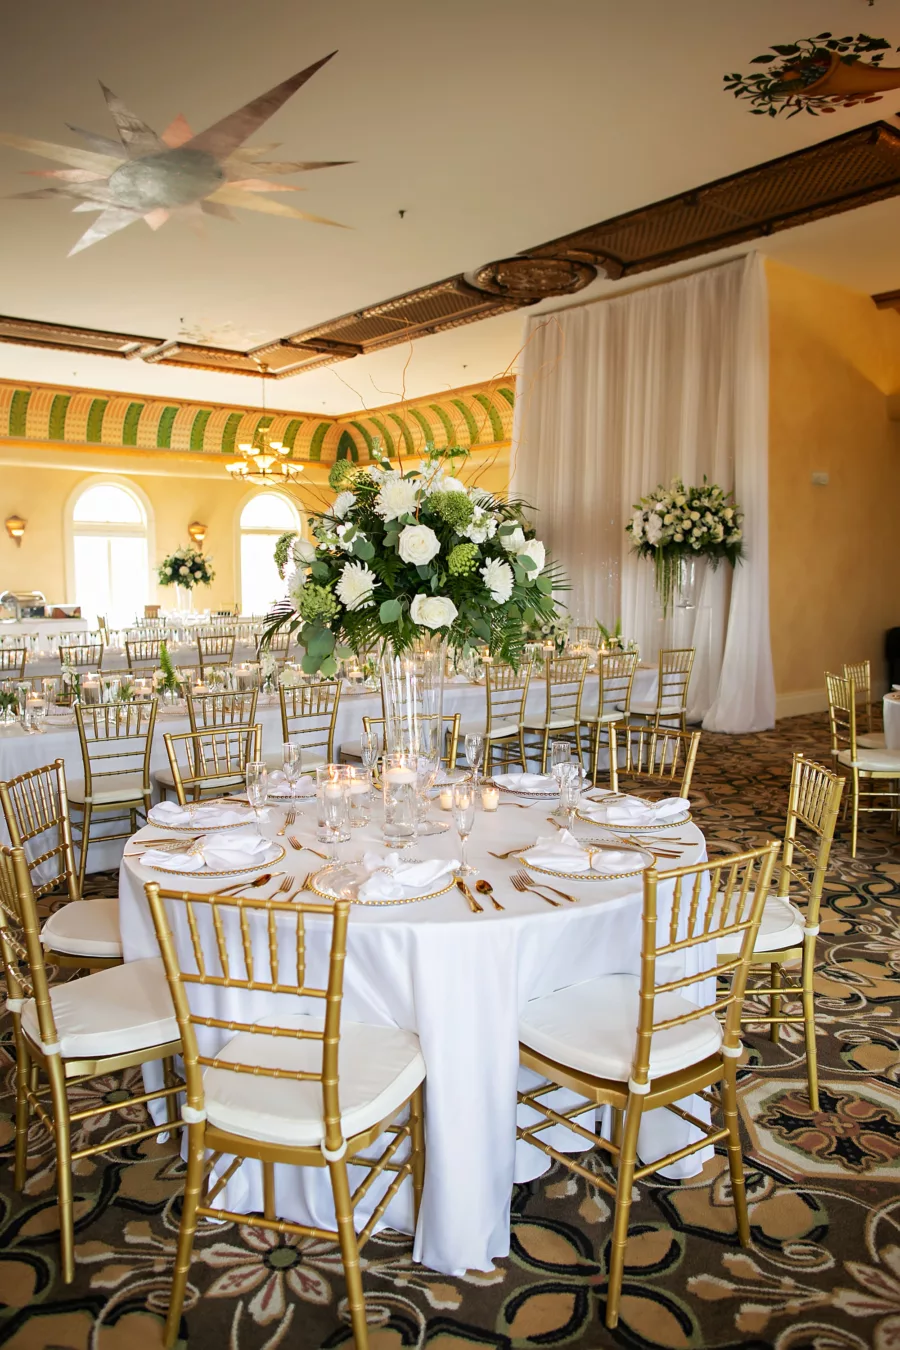 Classic White Italian Inspired Wedding Reception Decor Inspiration | White Drapery, Long Feasting Tables, Gold Chiavari Chairs | Ybor Planner Coastal Coordinating | Outside The Box Event Rentals | Photography Limelight Photography